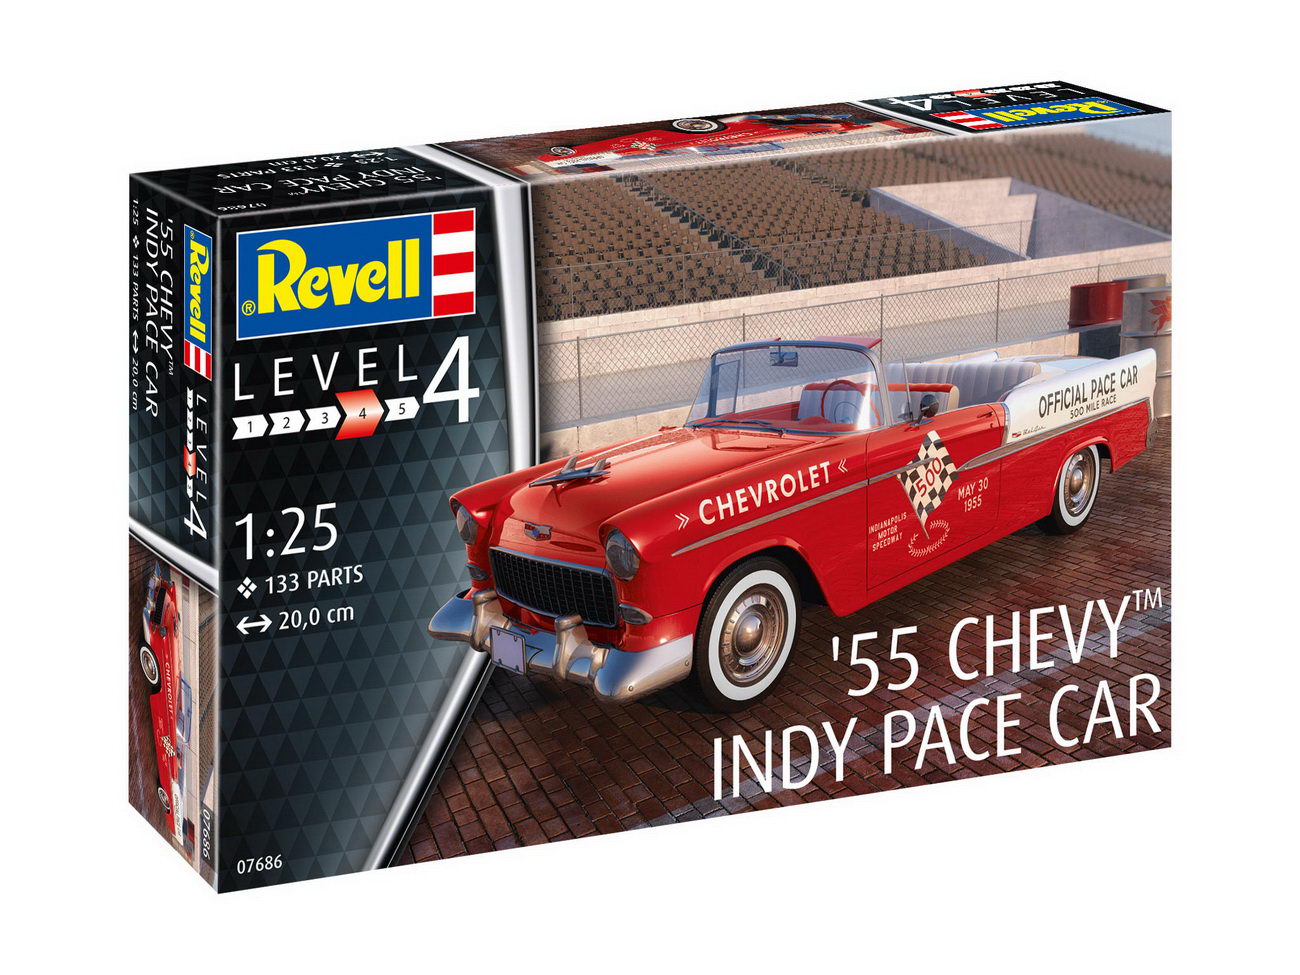 Revell 07686 - 1955 Chevy Indy Pace Car - Auto Modell